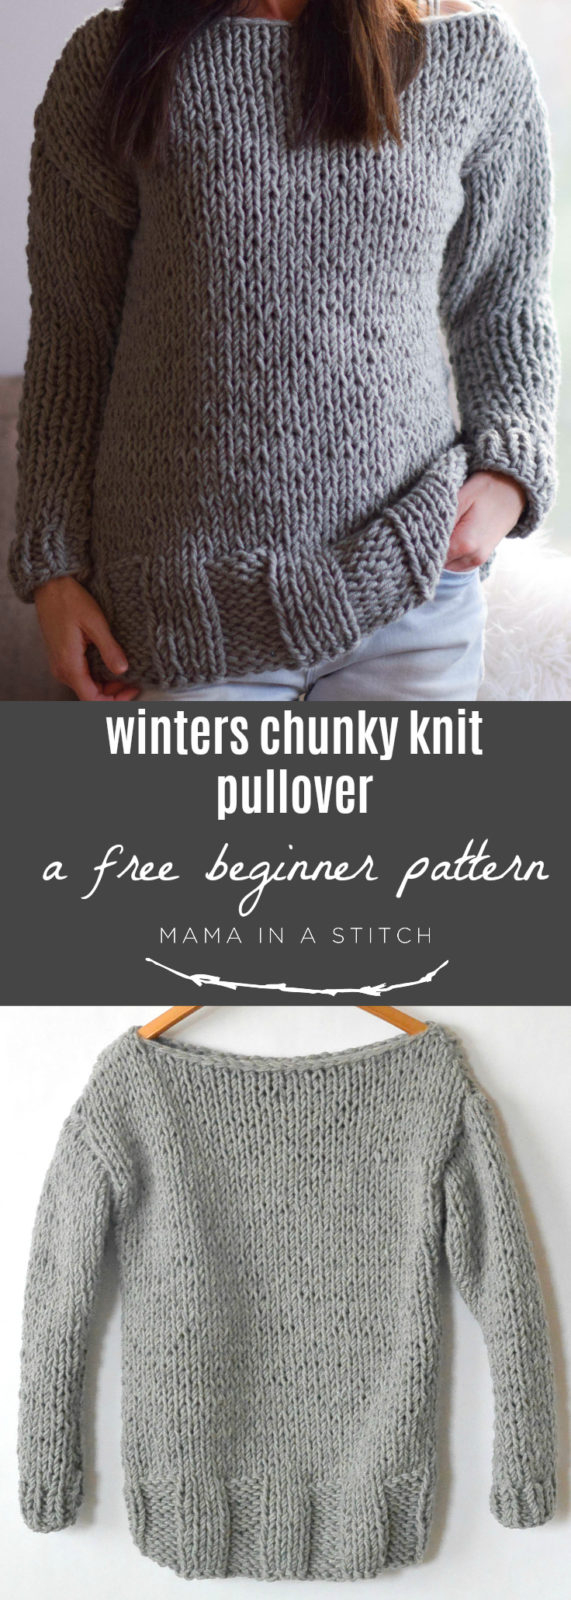 Easy Jumper Knitting Pattern Winters Chunky Easy Knit Pullover Pattern Mama In A Stitch